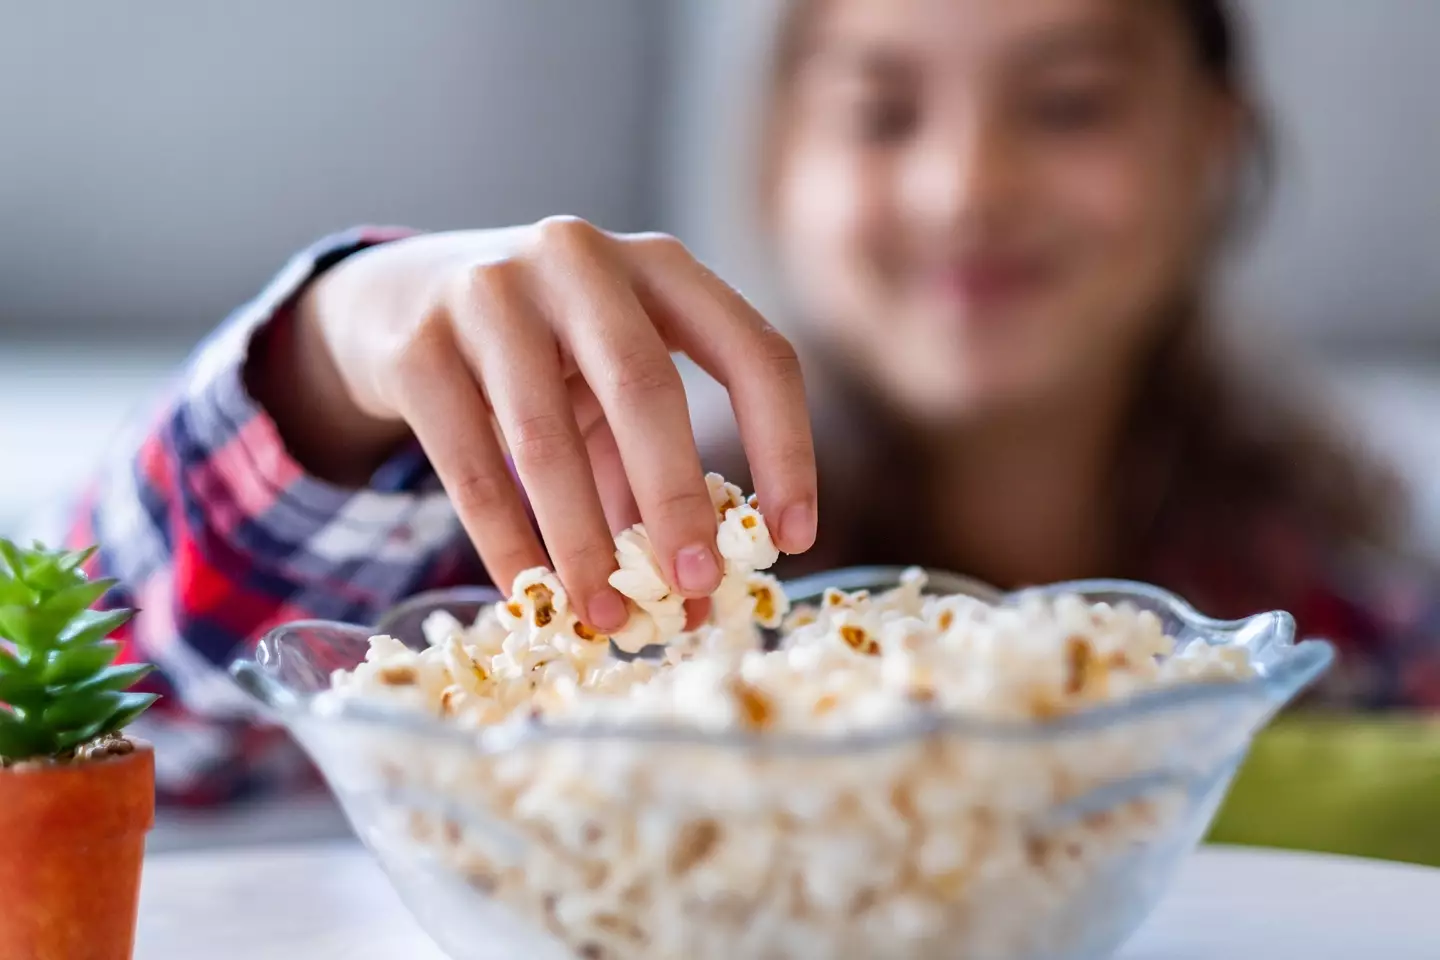 Sarah believes popcorn should be left out of children's lunchboxes.